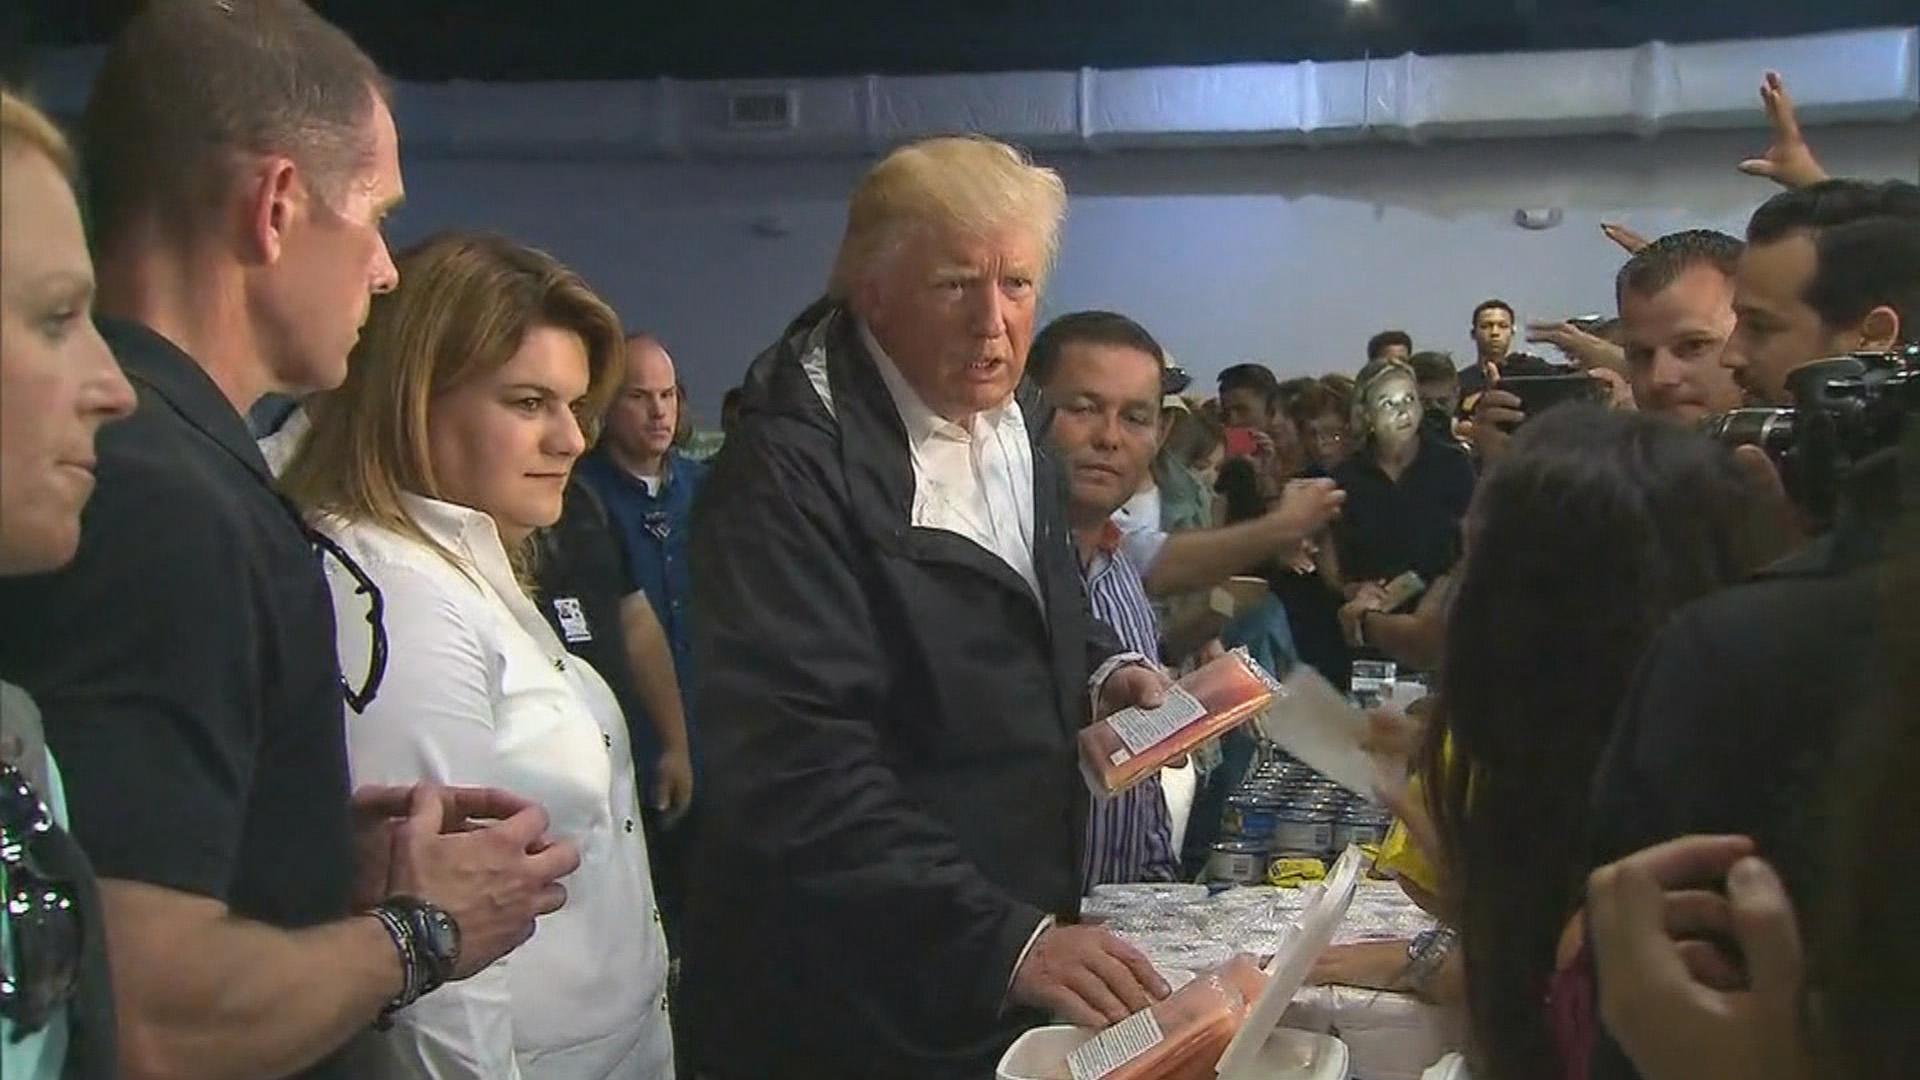 President Donald Trump visits Puerto Rico in 2017 after Hurricane Maria hit the island. (WTTW News via CNN)